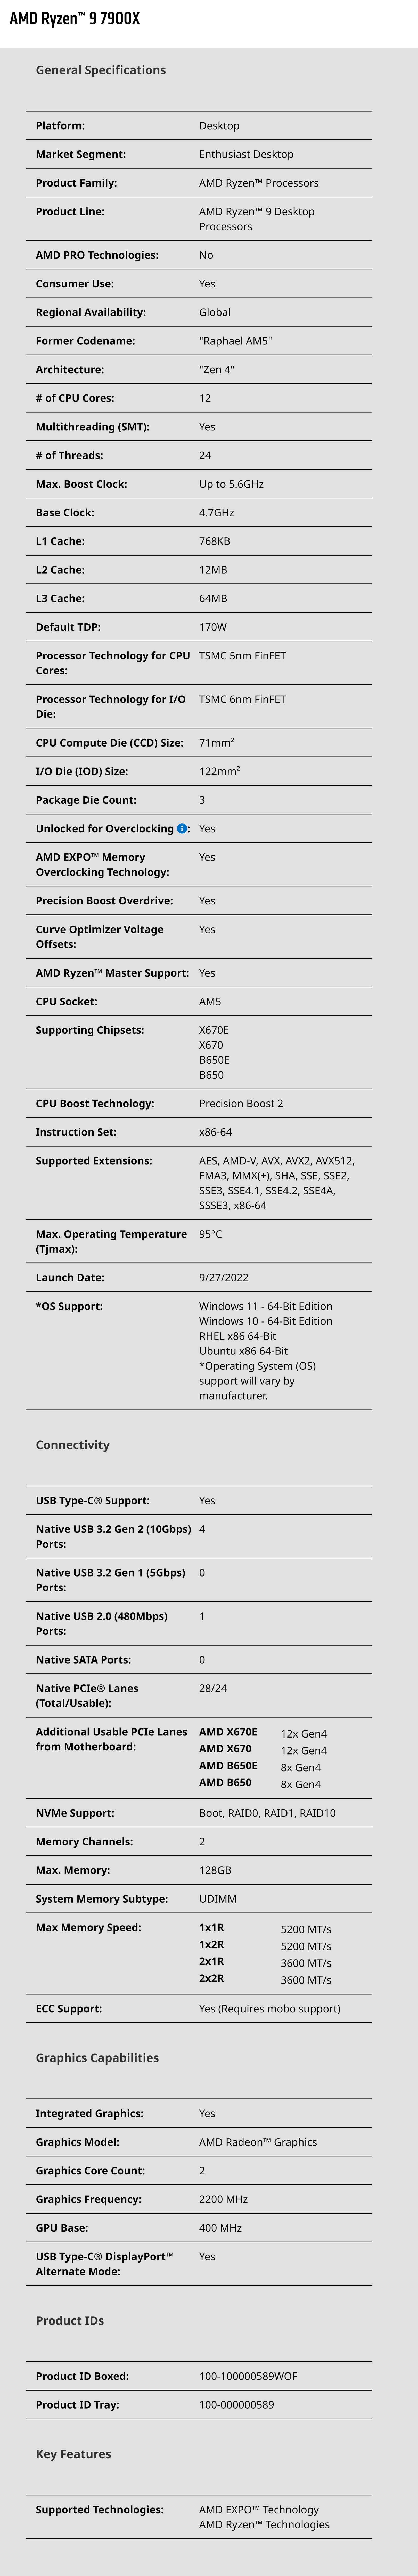 A large marketing image providing additional information about the product AMD Ryzen 9 7900X 12 Core 24 Thread Up To 5.6GHz AM5 - No HSF Retail Box - Additional alt info not provided